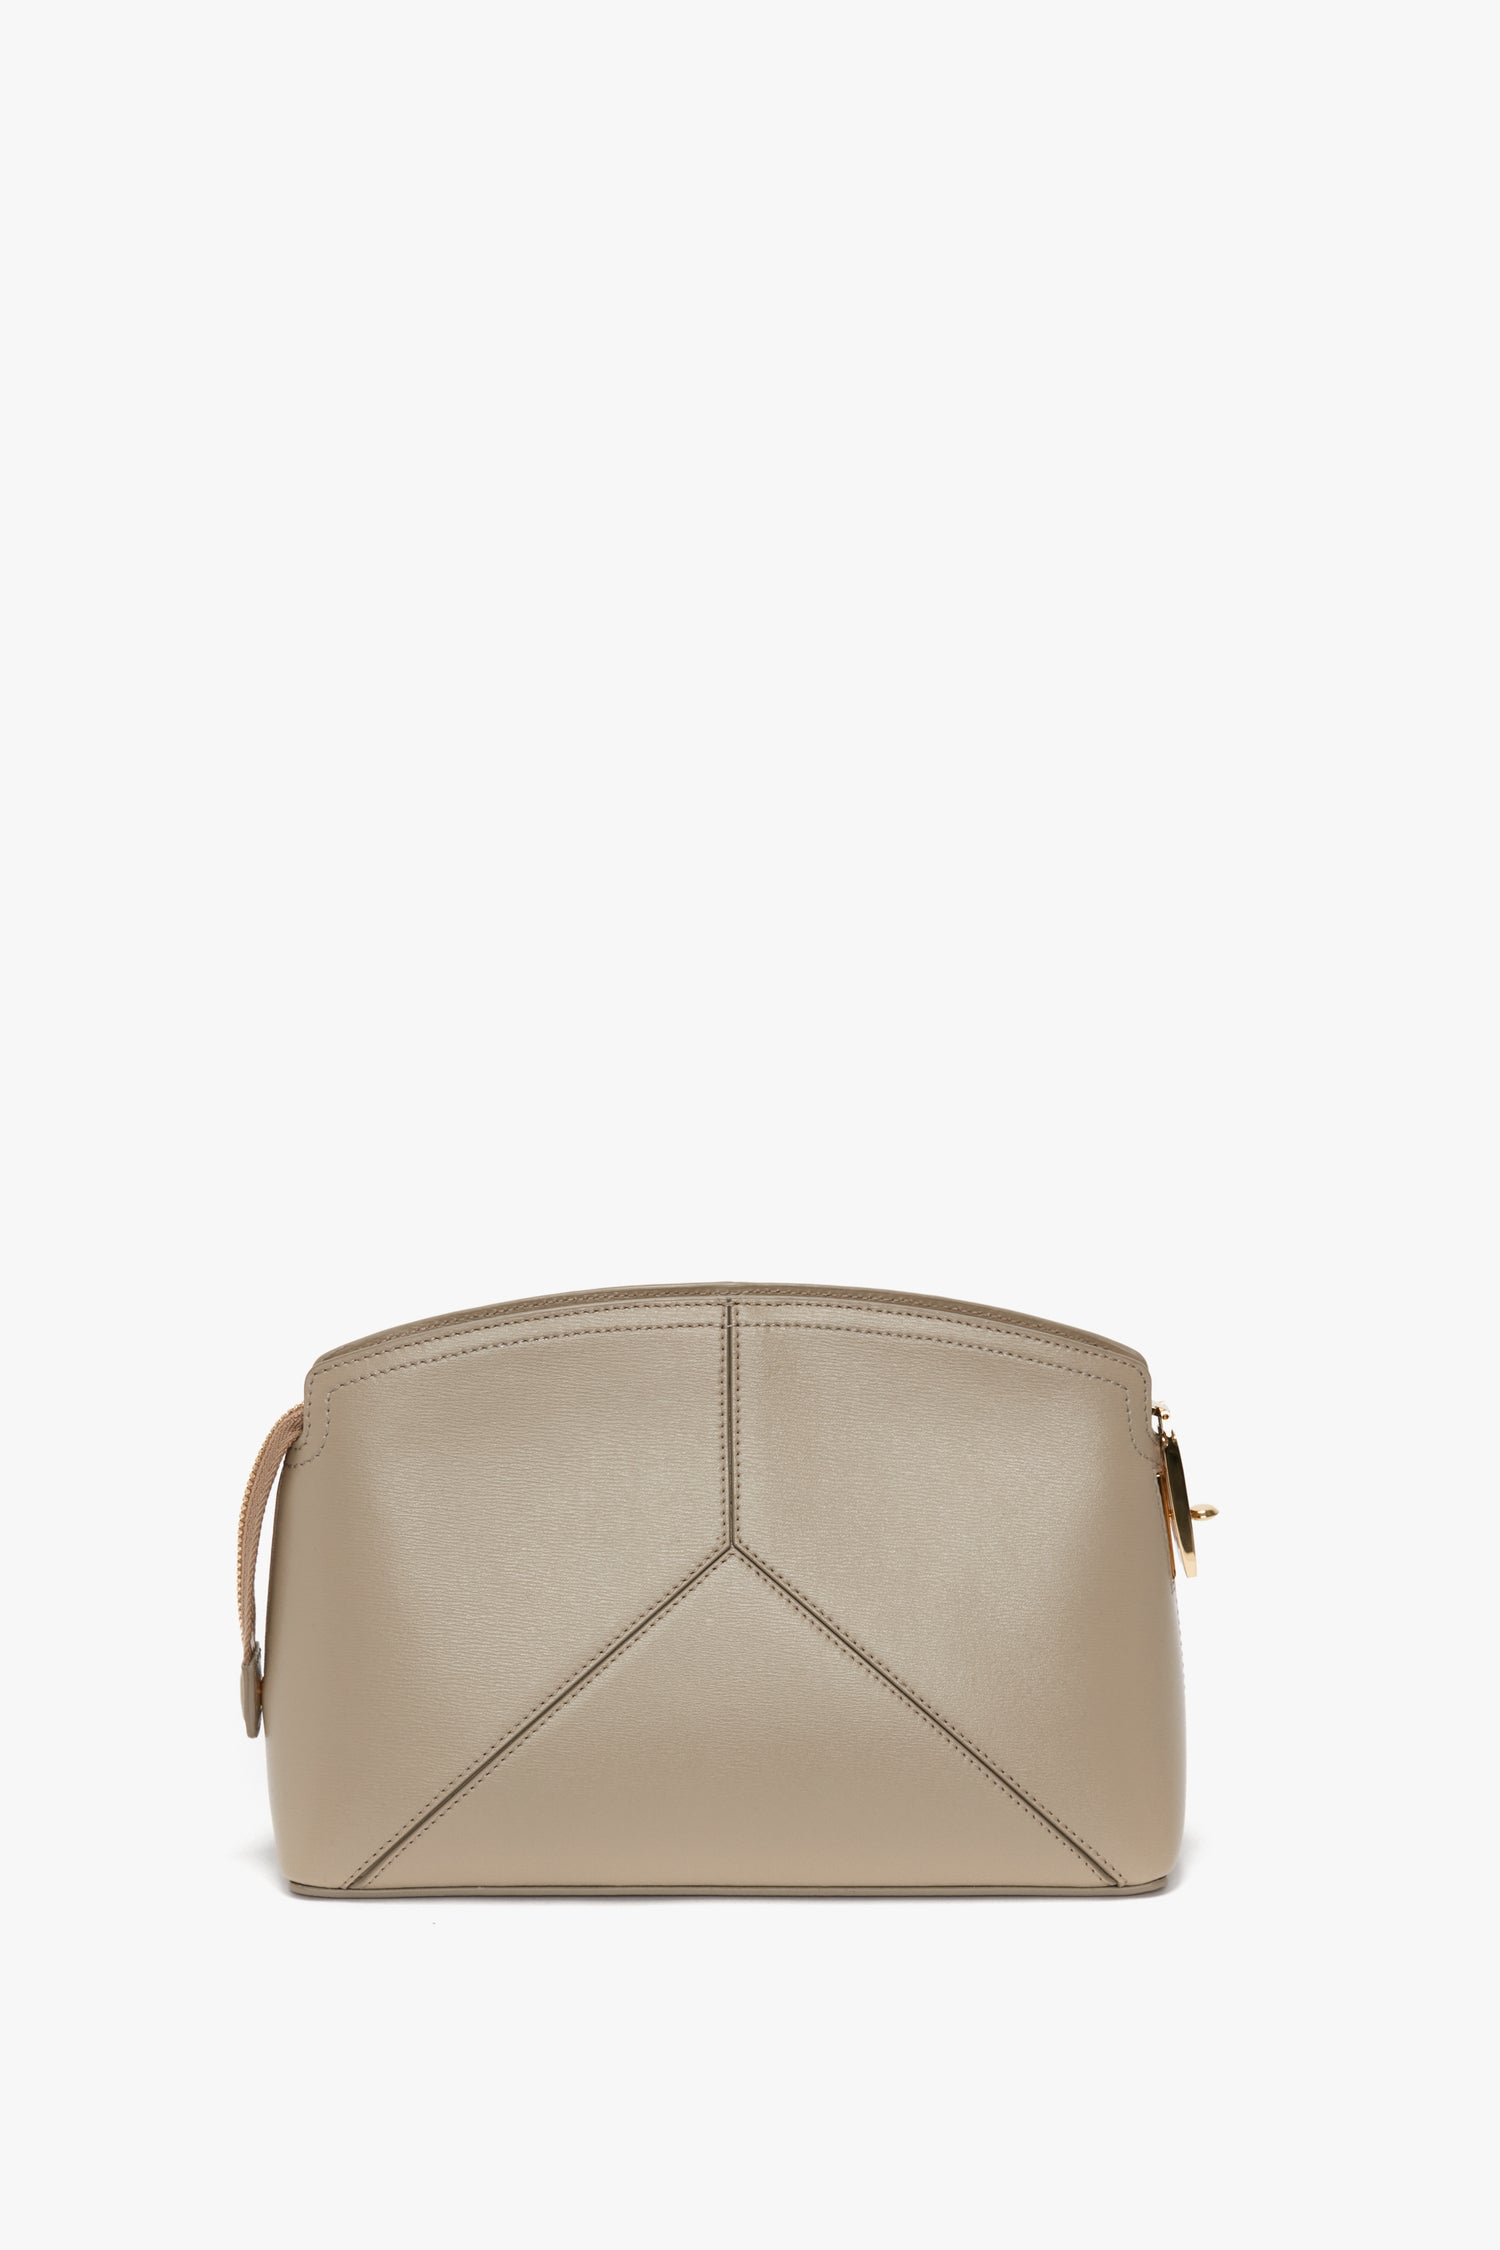 Beige, structured handbag with a geometric design, featuring a rounded top and gold hardware on the zippers. This Victoria Beckham Victoria Crossbody Bag In Taupe Leather marries elegance with modern functionality.